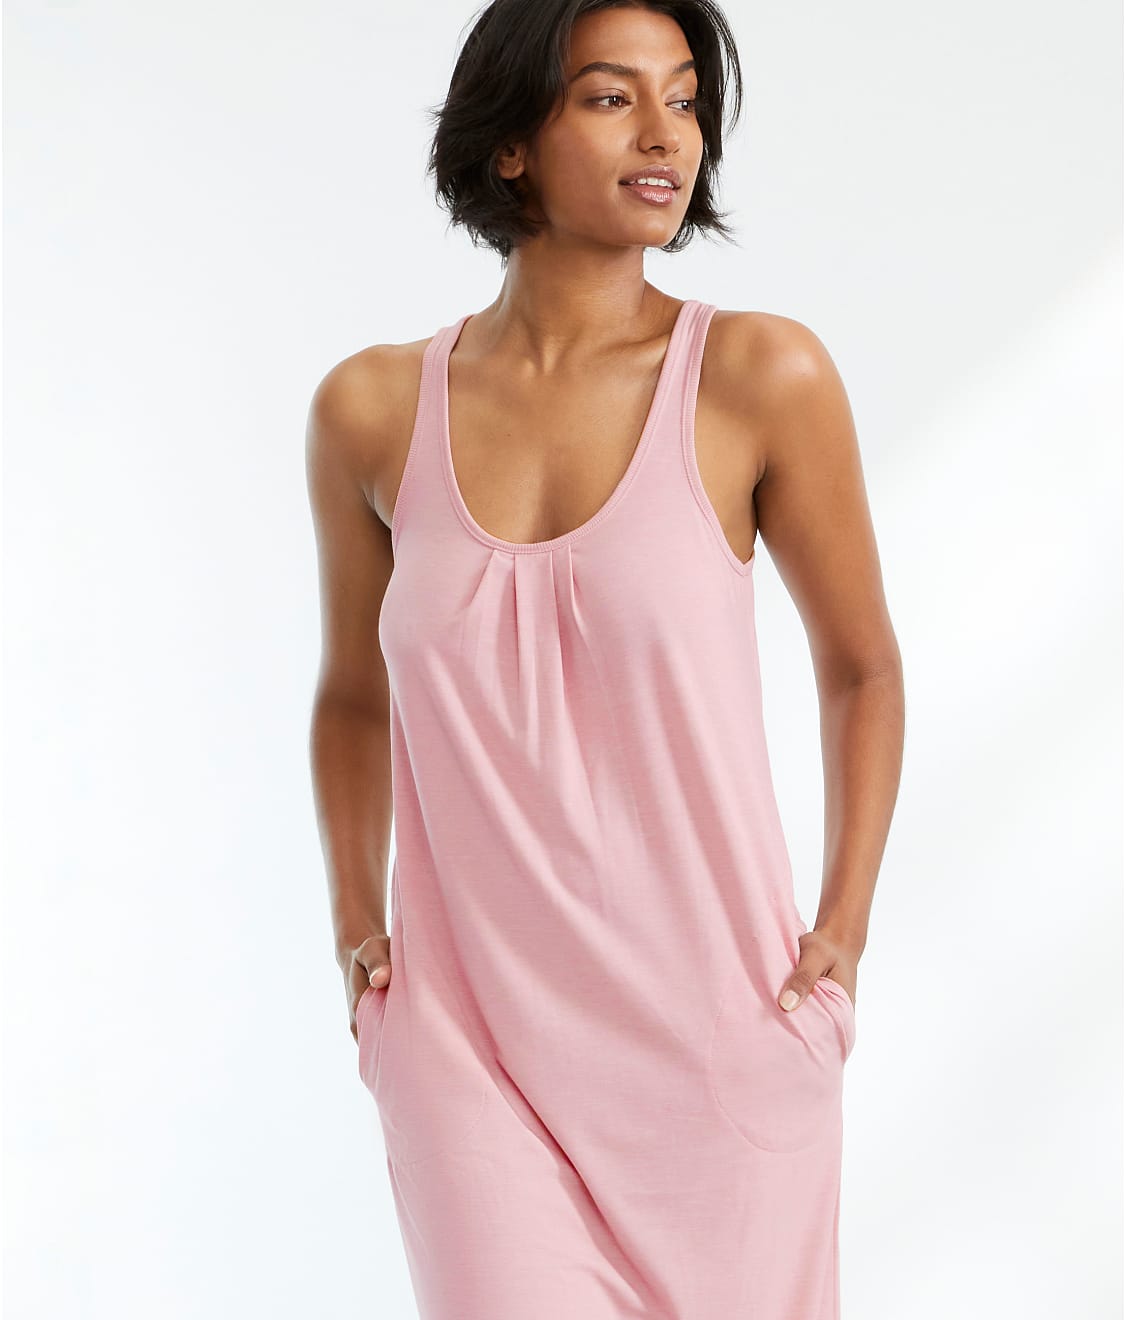 Bare Necessities: Relax, Recharge, Recycled Knit Chemise  DRJ209